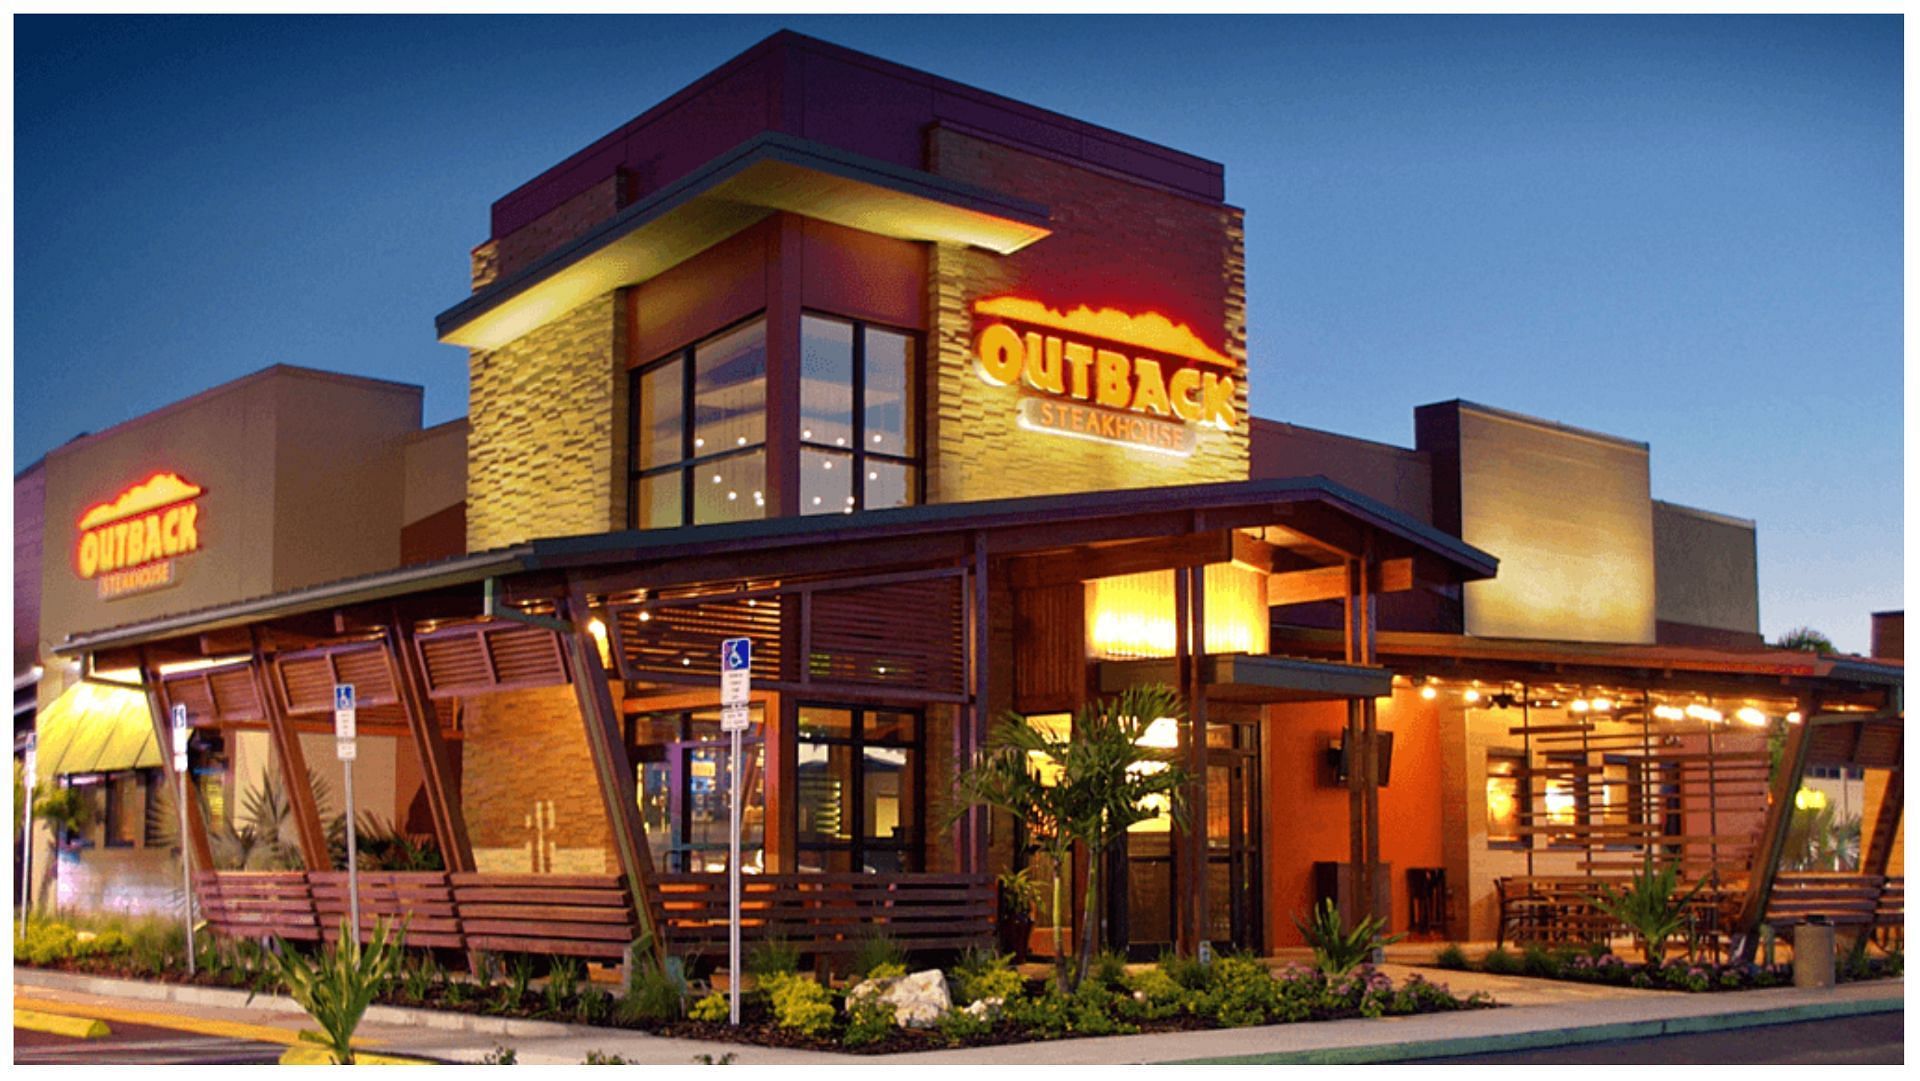 Outback Steakhouse Winter releases its 2022 menu (Image via Outback Steakhouse)